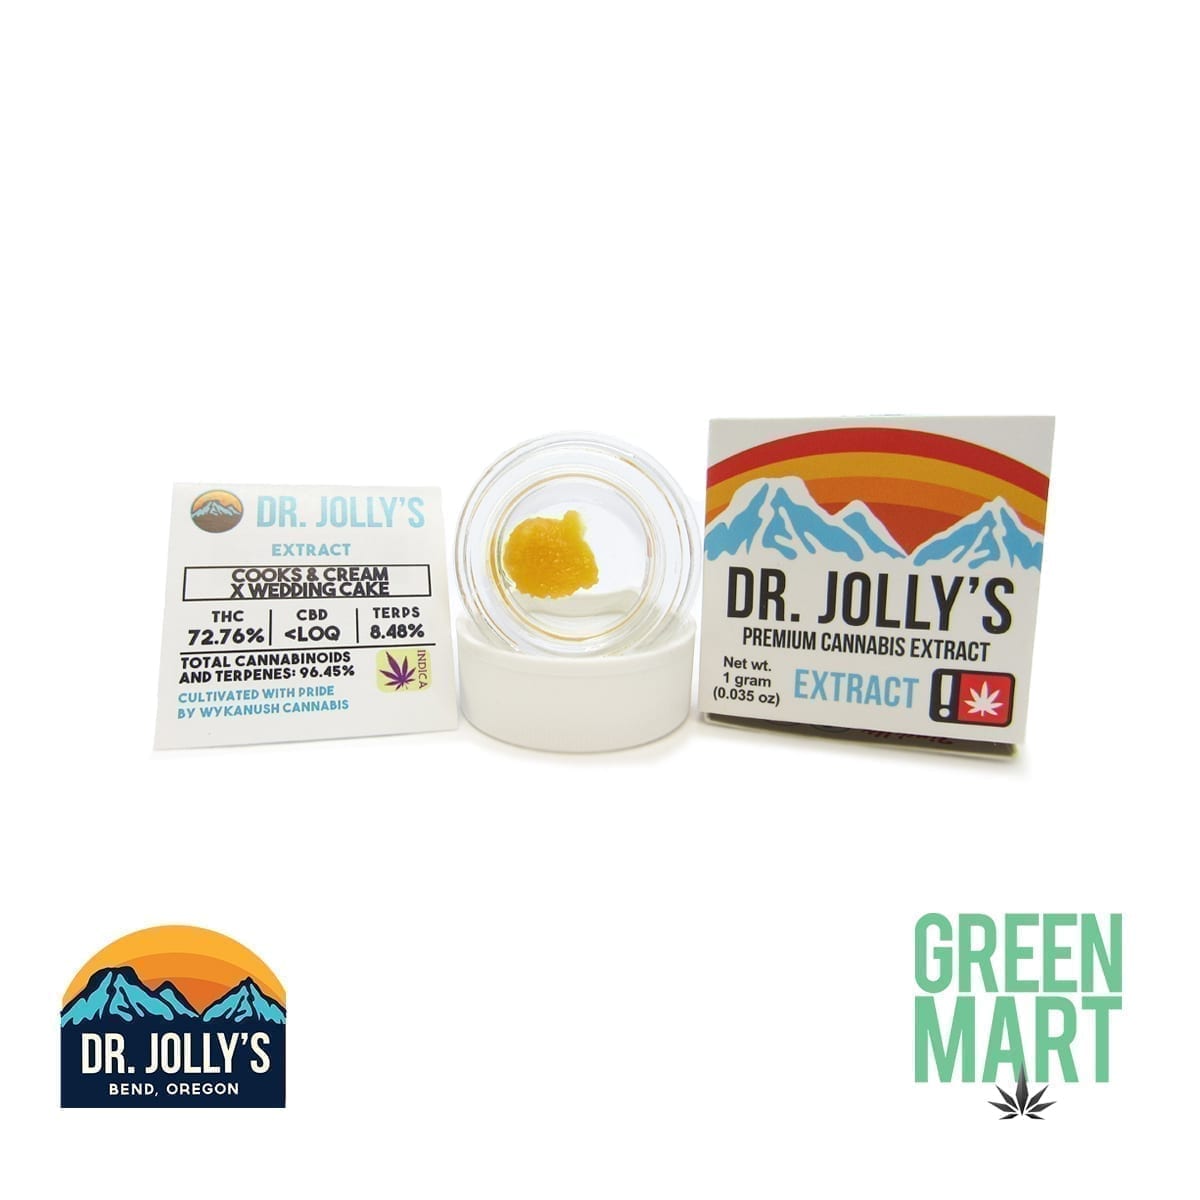 Dr. Jolly's Extracts - Cooks & Cream X Wedding Cake